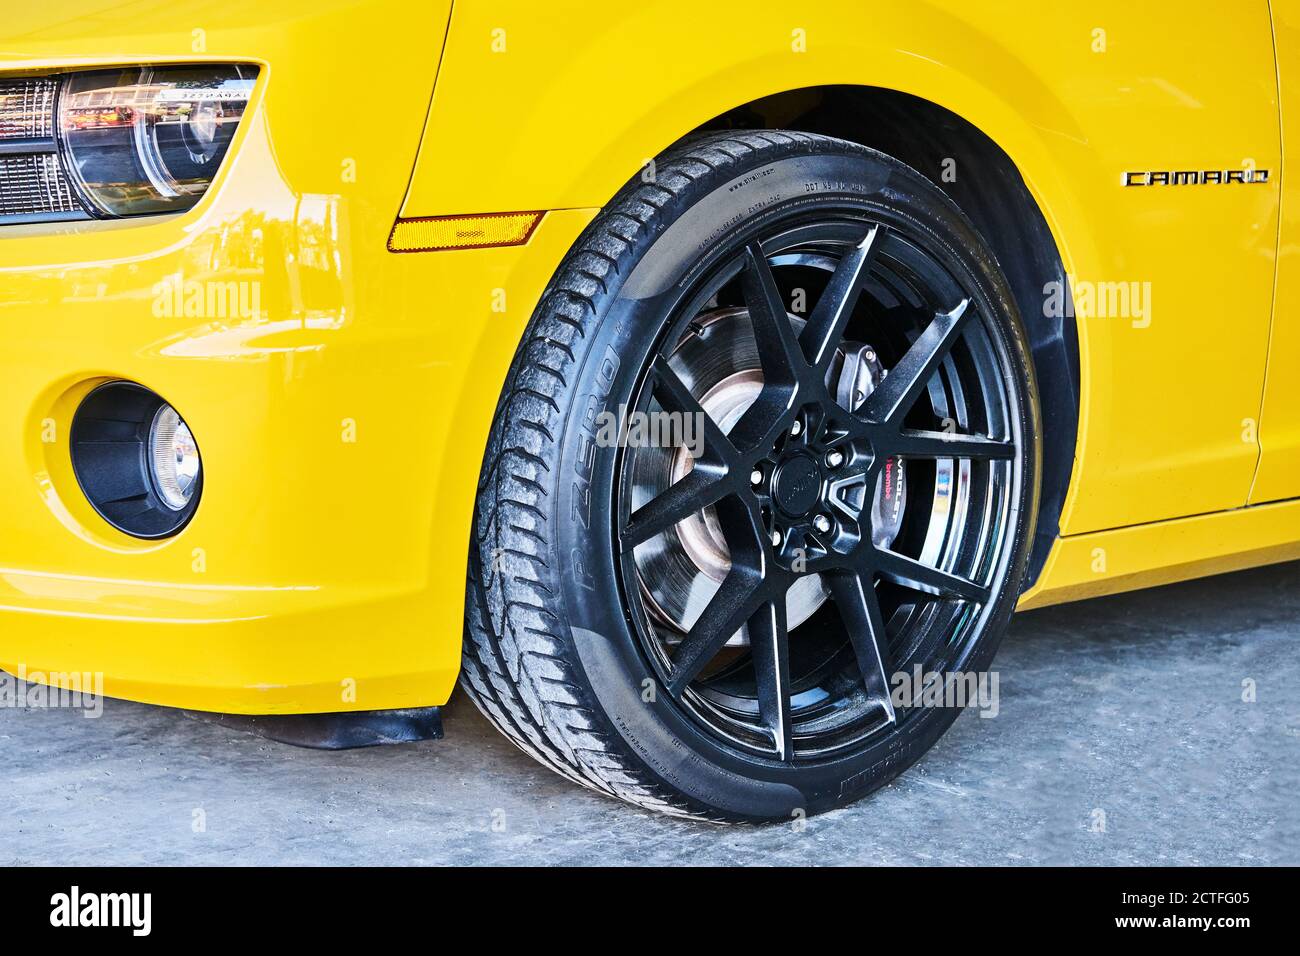 Isolated side view of a wheel and headlights of a yellow Chevrolet Camaro sports car parking along the road in Iloilo city, Philippines, Asia Stock Photo